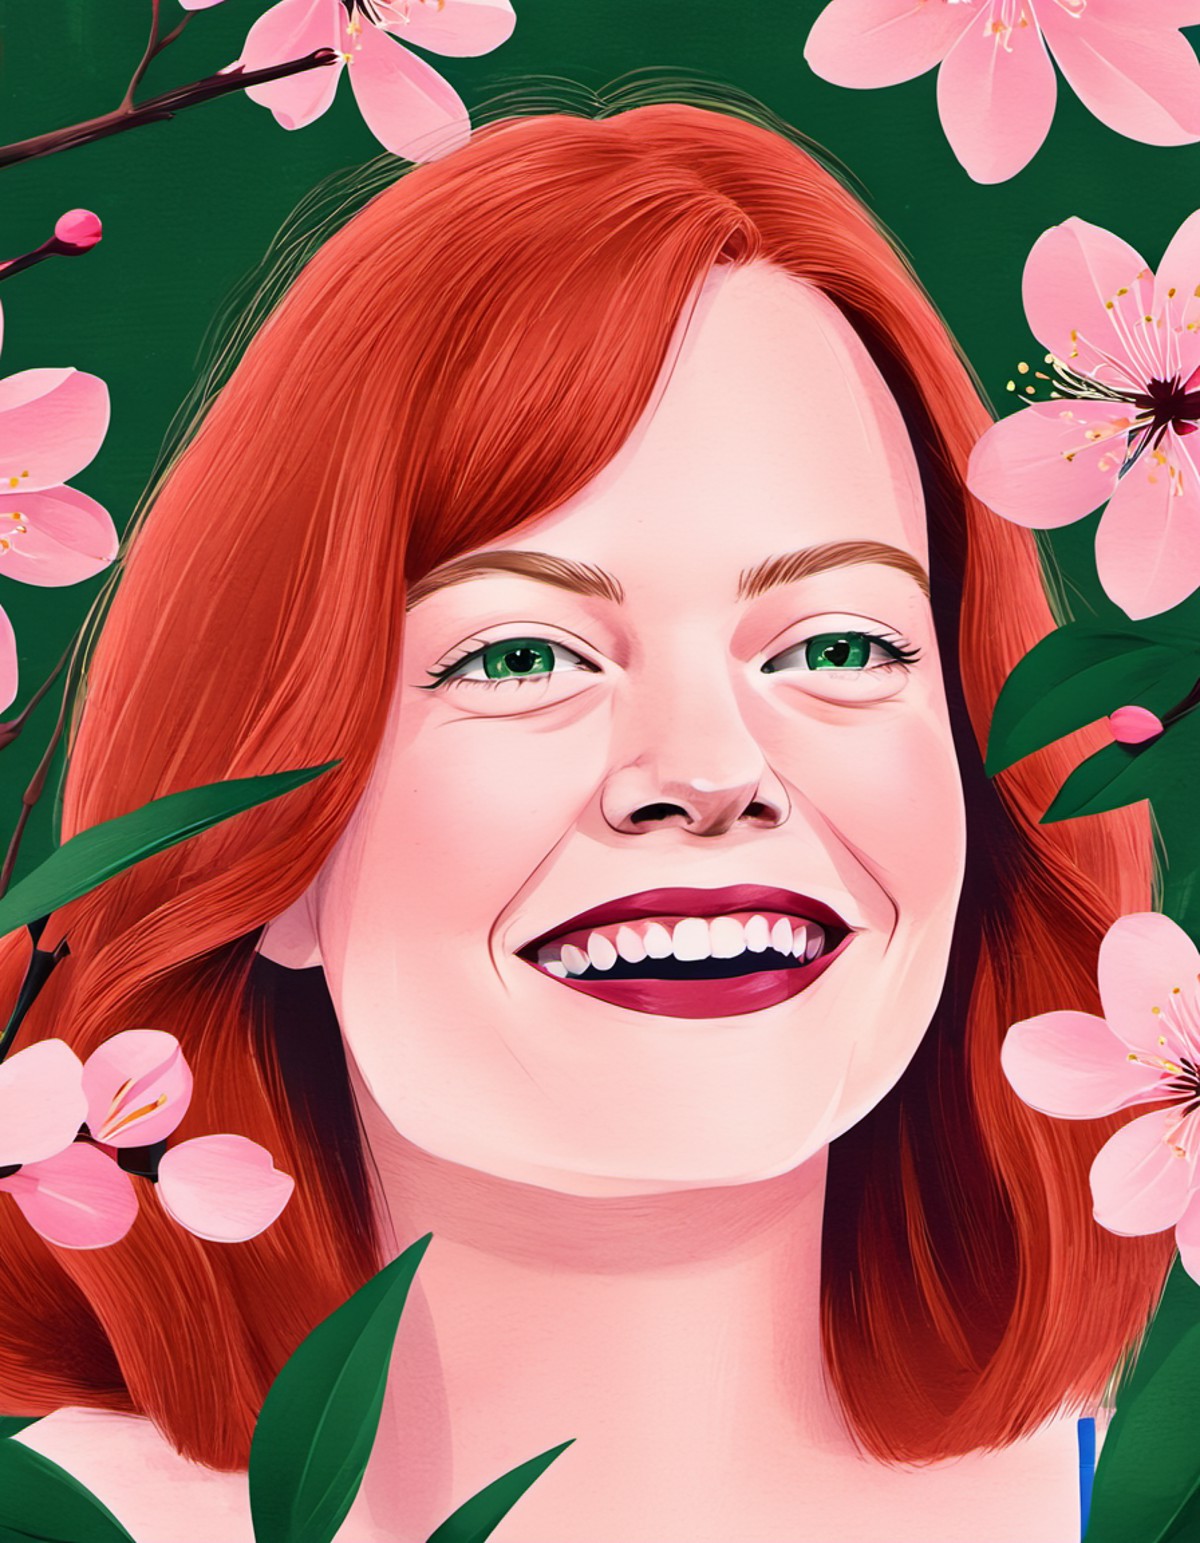 Minimalistic modern illustration closeup of Emma Stone with red hair smiling with teeth, surrounded by soft pink cherry bl...